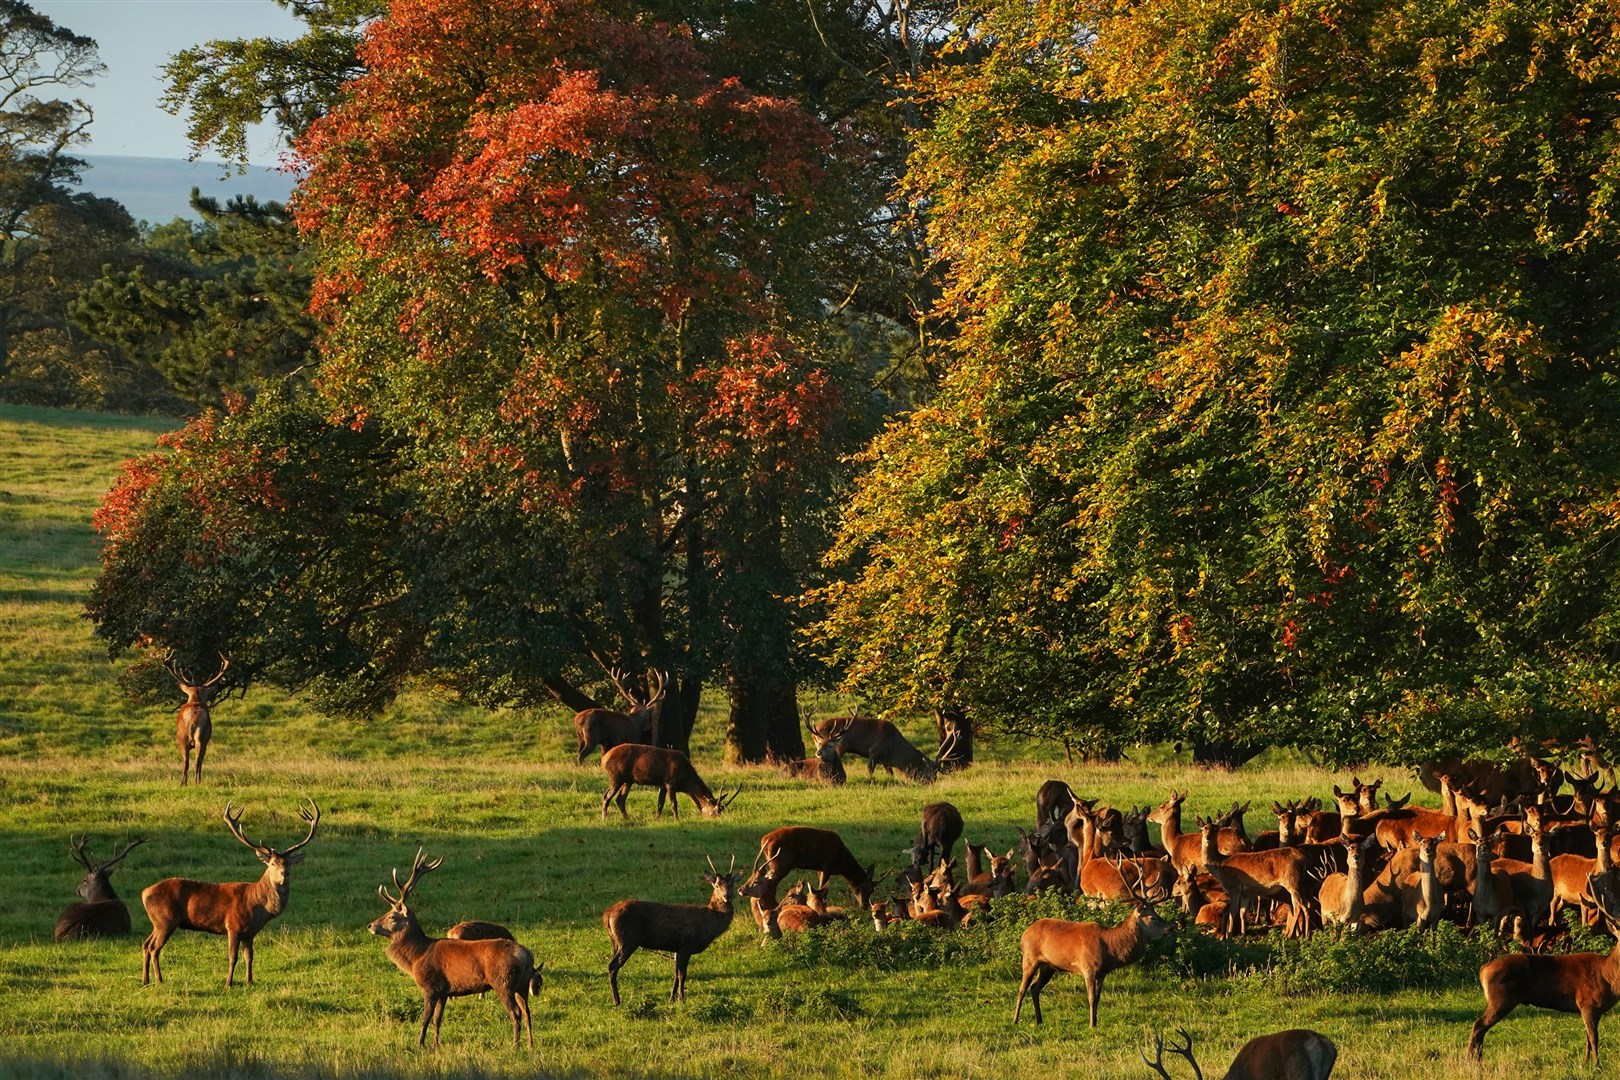 Deer at Raby Castle, a medieval castle near Staindrop in County Durham (Owen Humphreys/PA)